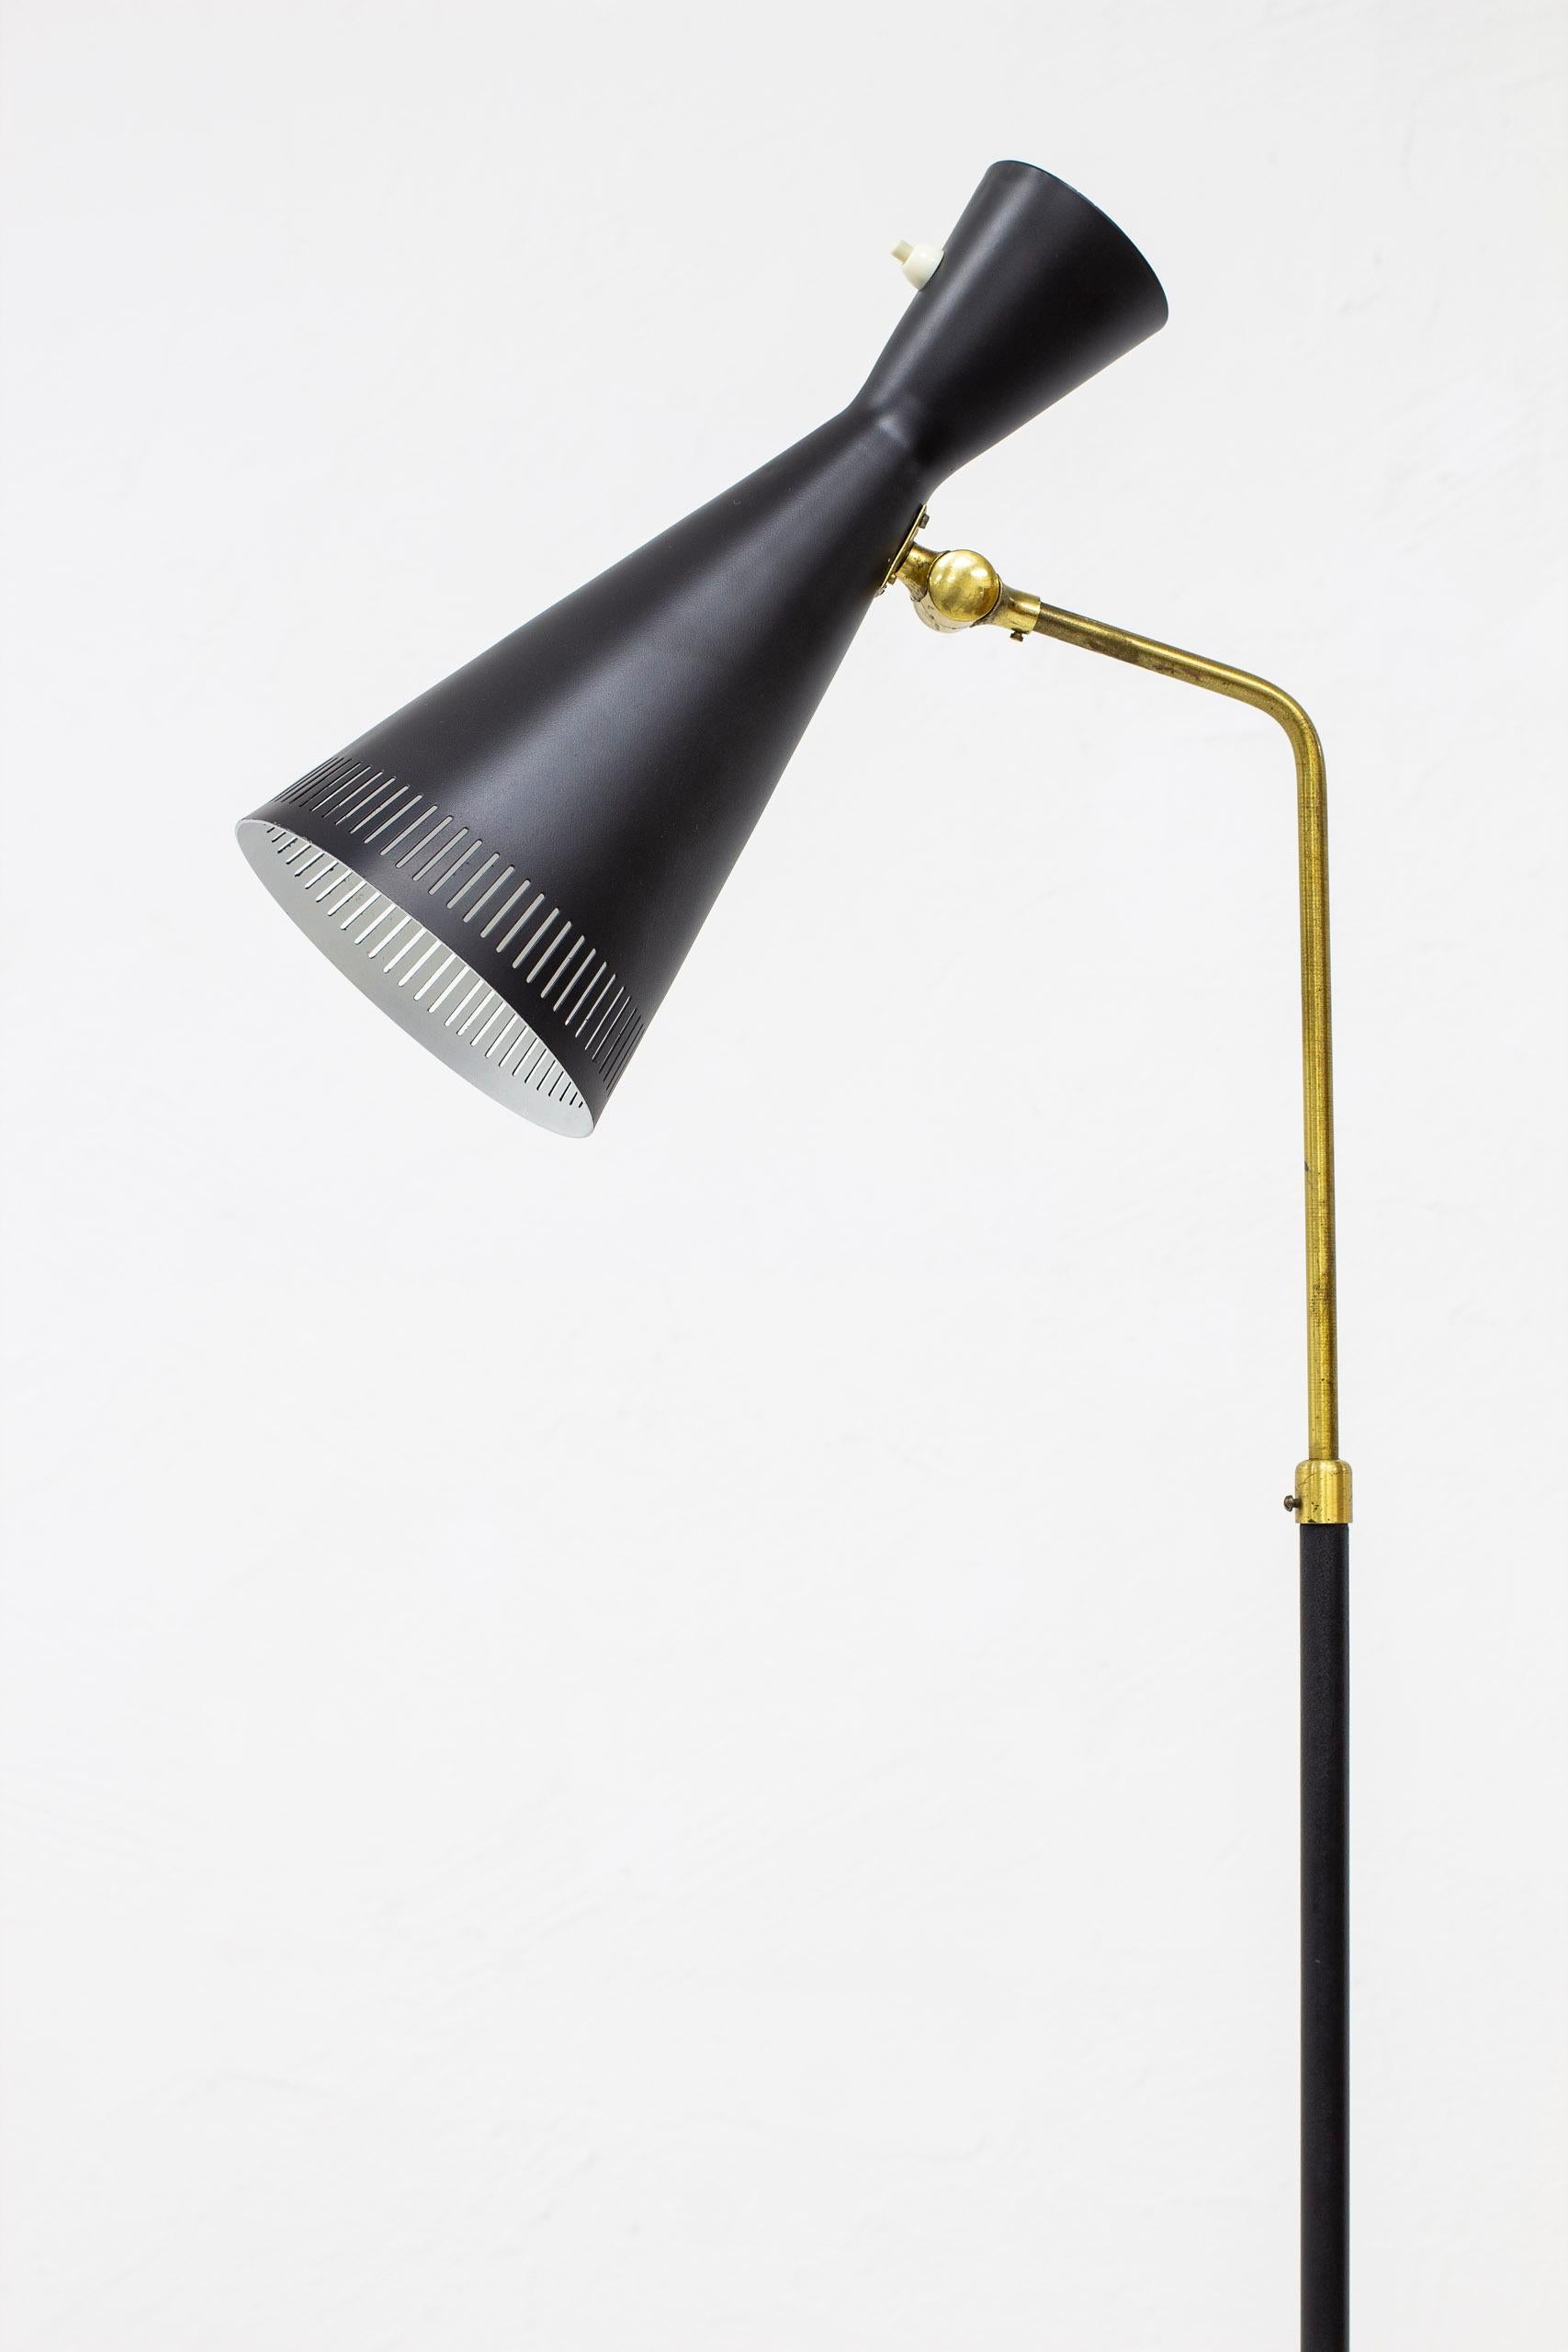 Floor lamp designed and produced in Sweden by Pagos during the 1950s. Made from black lacquered metal and brass. Shade with elegant perforation and Adjustable joint. Light switch on the lamp shade in working order. Very good vintage condition with